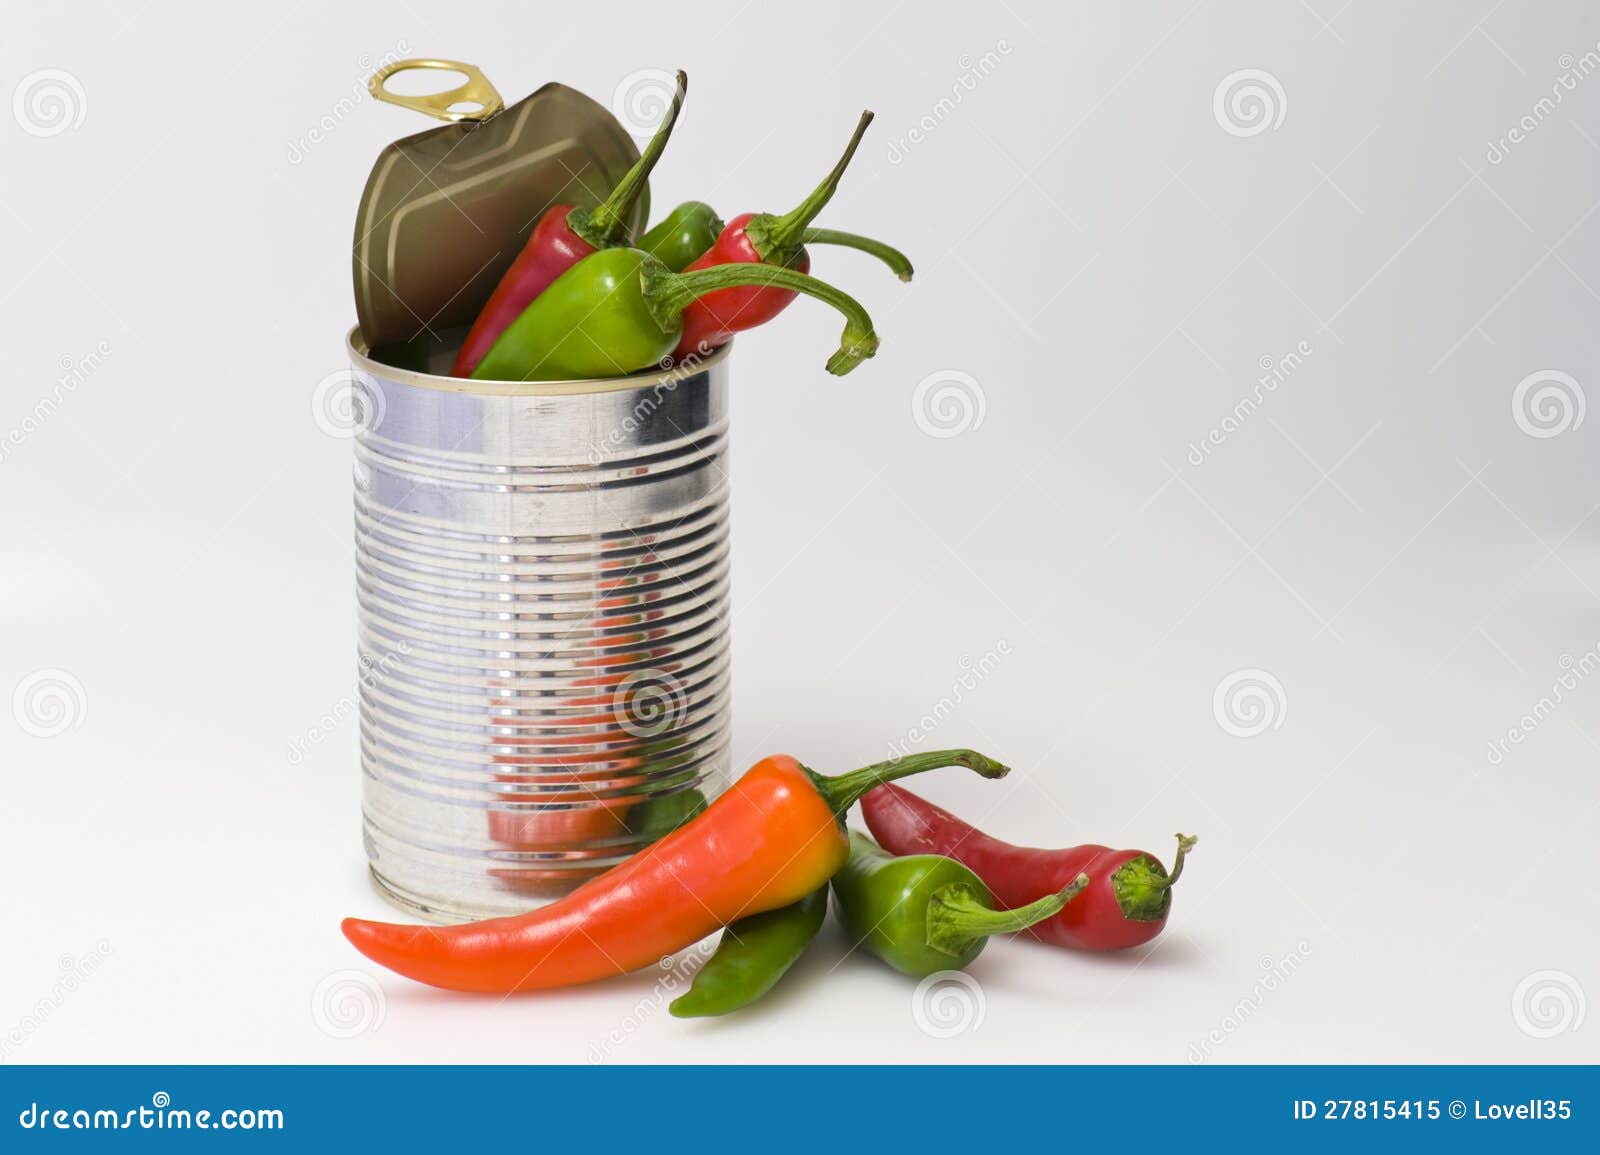 Tin of chillies. Stainless steel can with coloured chillies